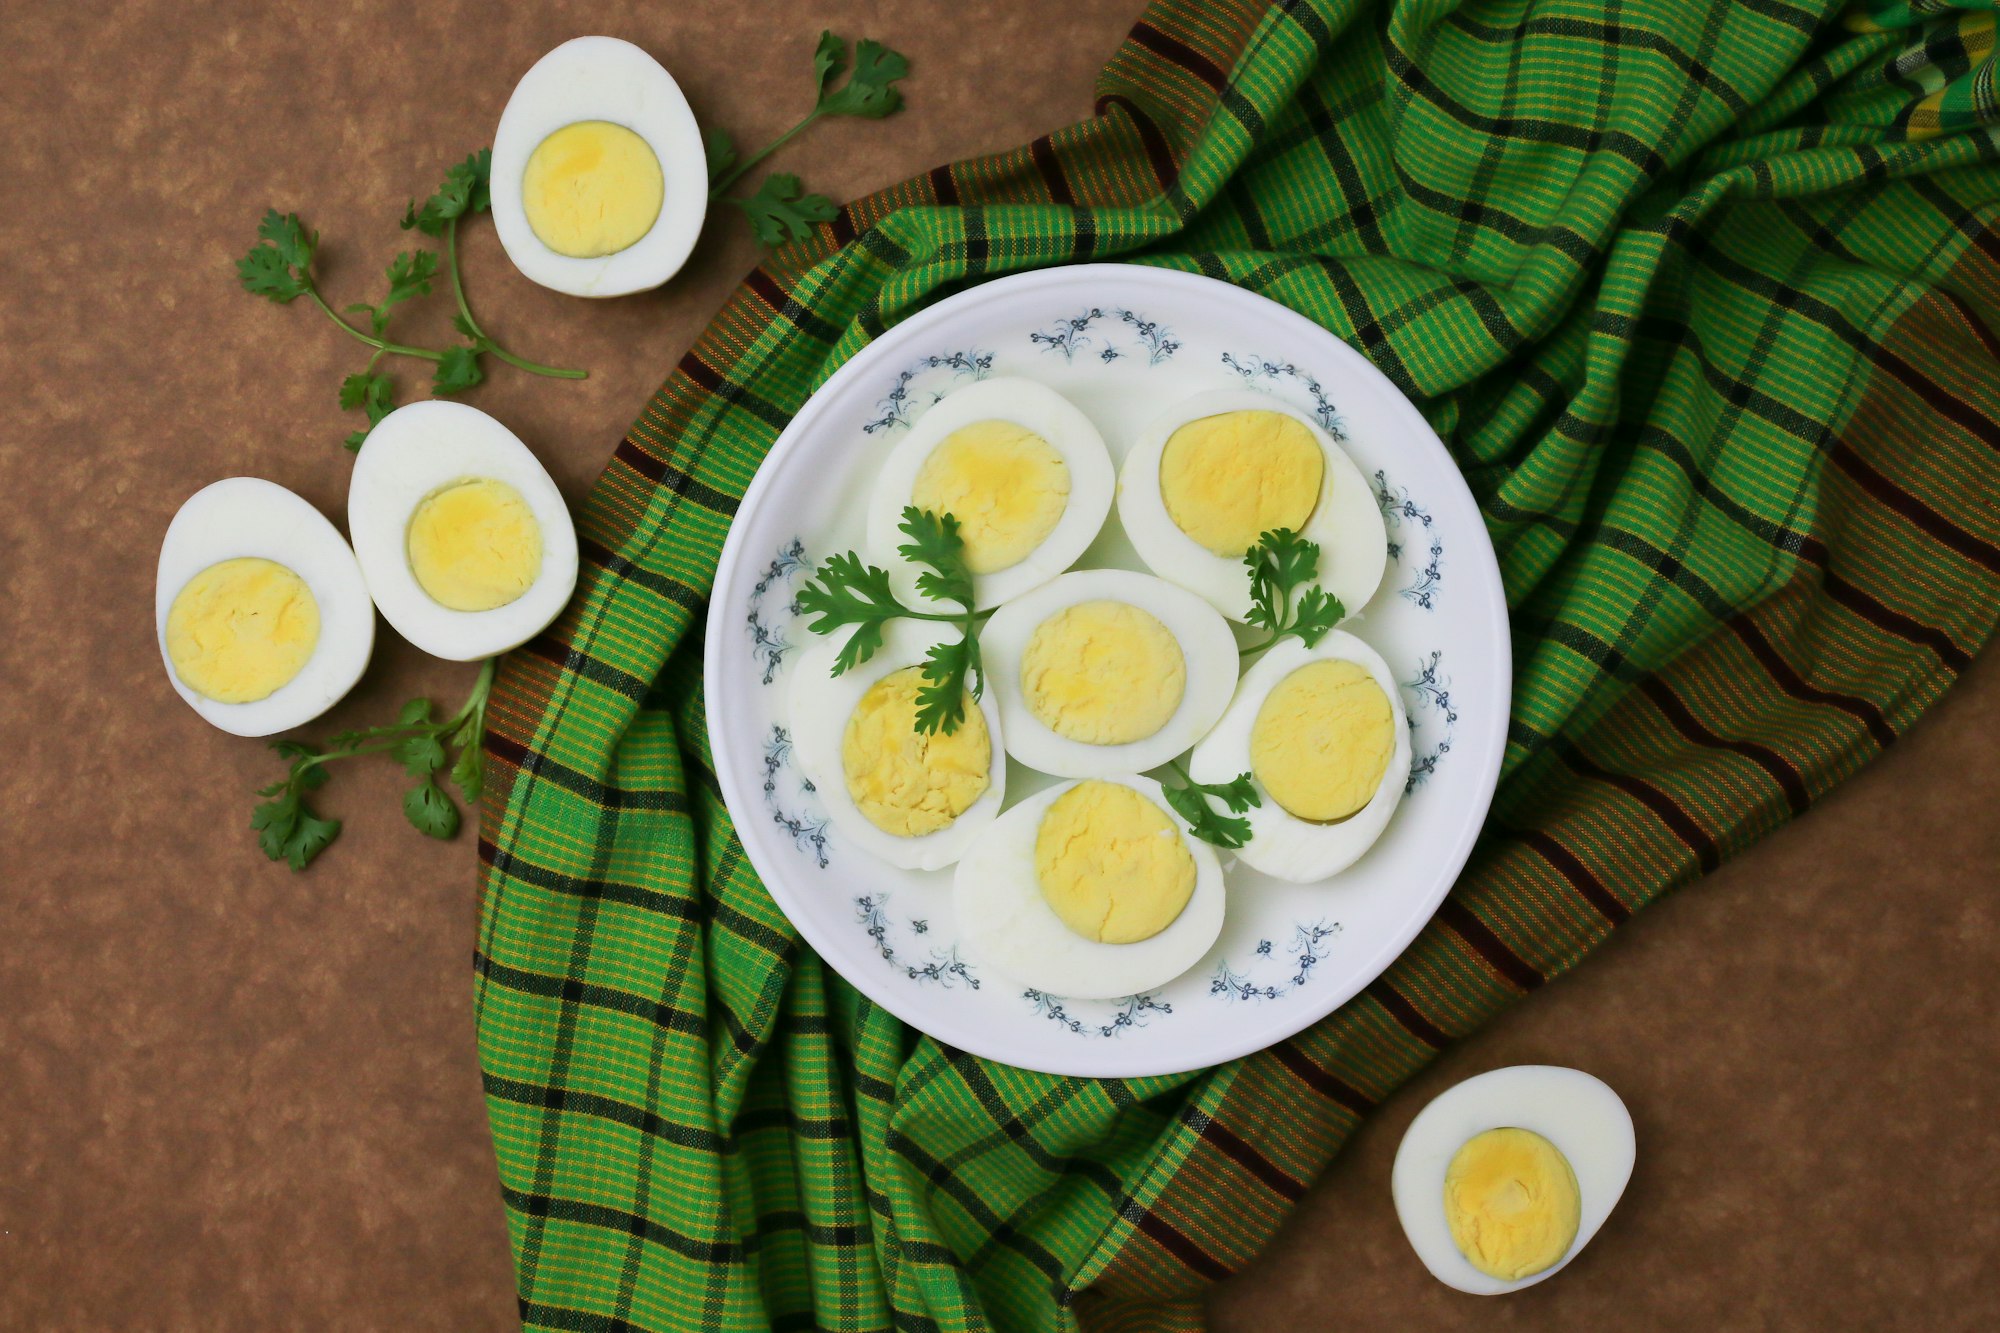 Sliced boiled eggs on white plate with green parsley leaves.

